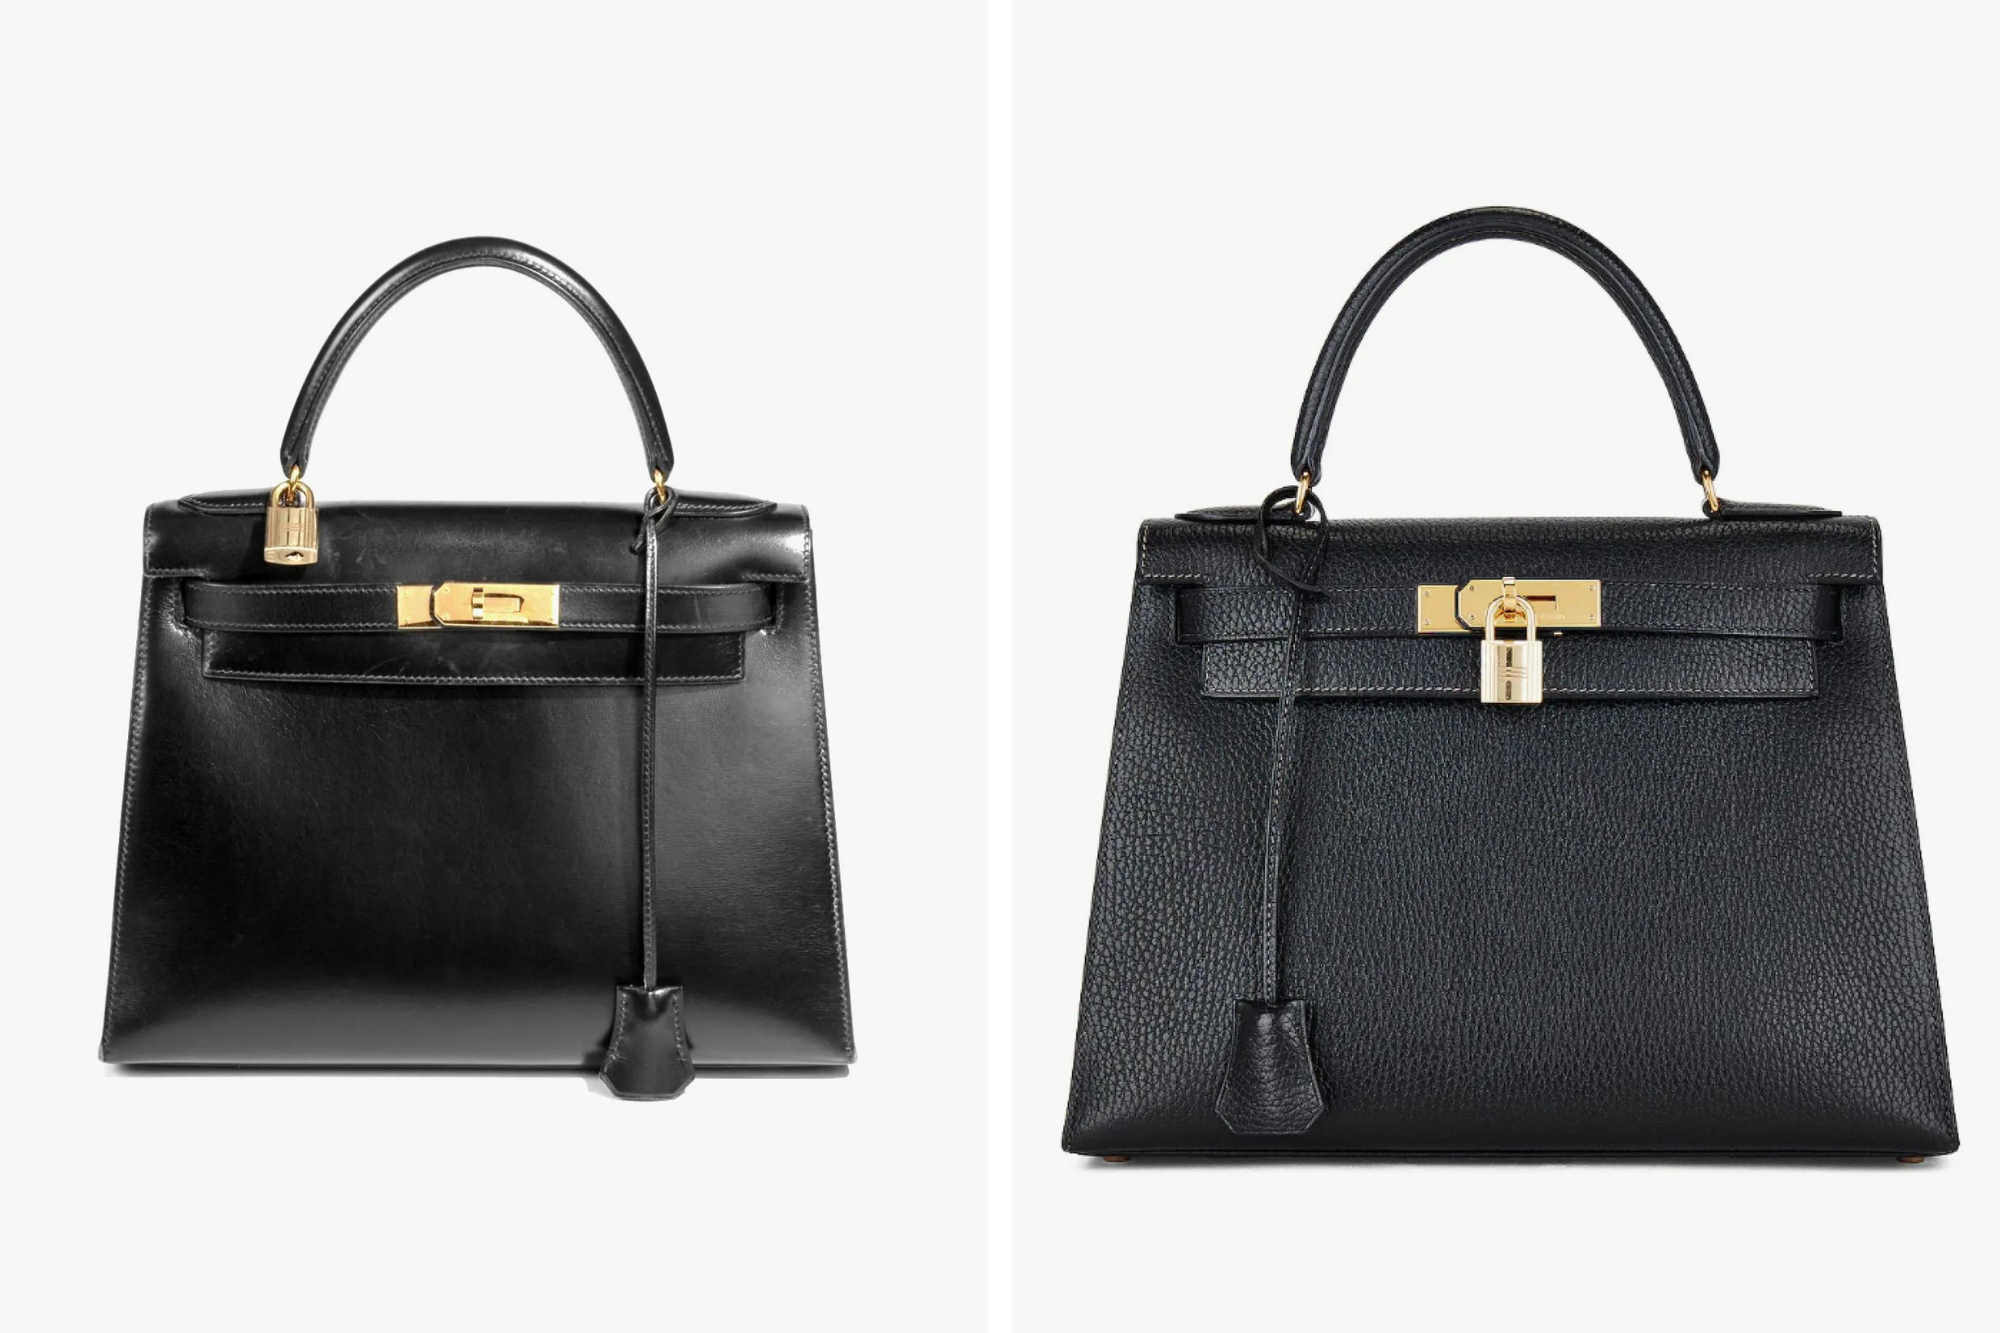 The 10 Luxury Bags With The Best Resale Value In 2023 